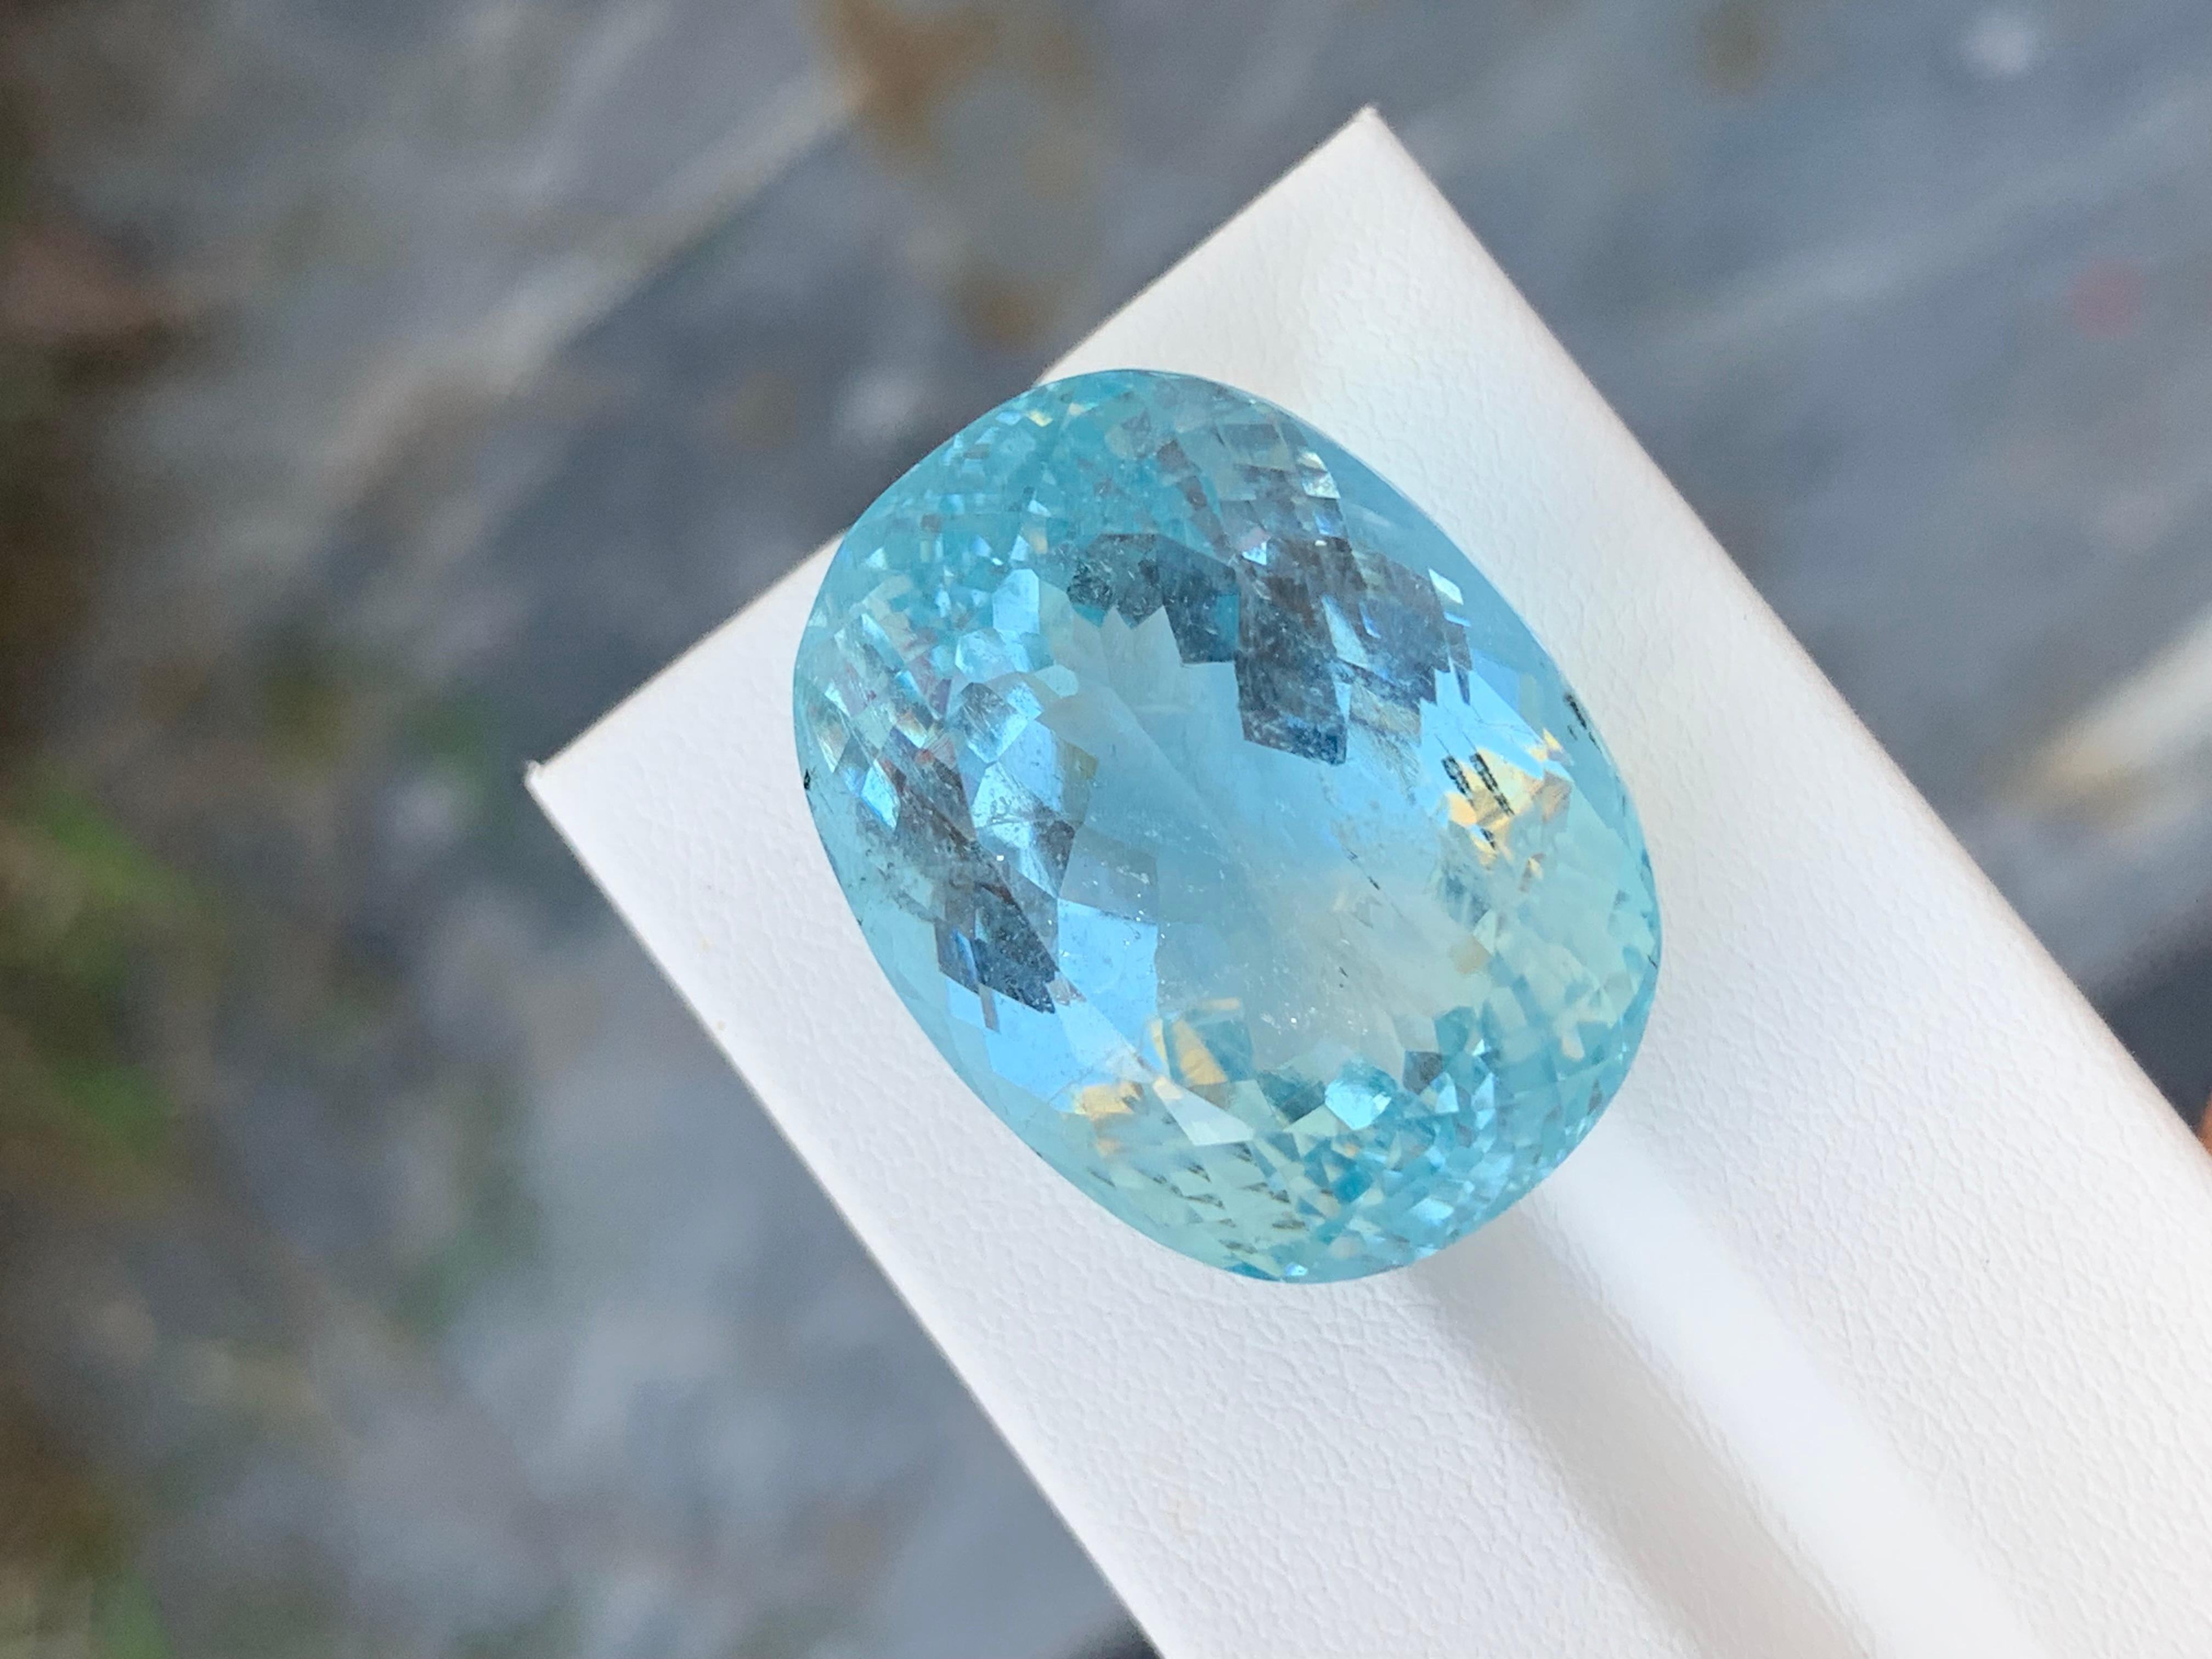 Loose Aquamarine
Weight: 63.70 Carat
Dimension: 26 x 20 x 18 Mm
Colour : Pale Blue
Origin: Madagascar, Africa
Treatment: Non
Certificate : On Demand
Shape: Oval

Aquamarine is a captivating gemstone known for its enchanting blue-green hues